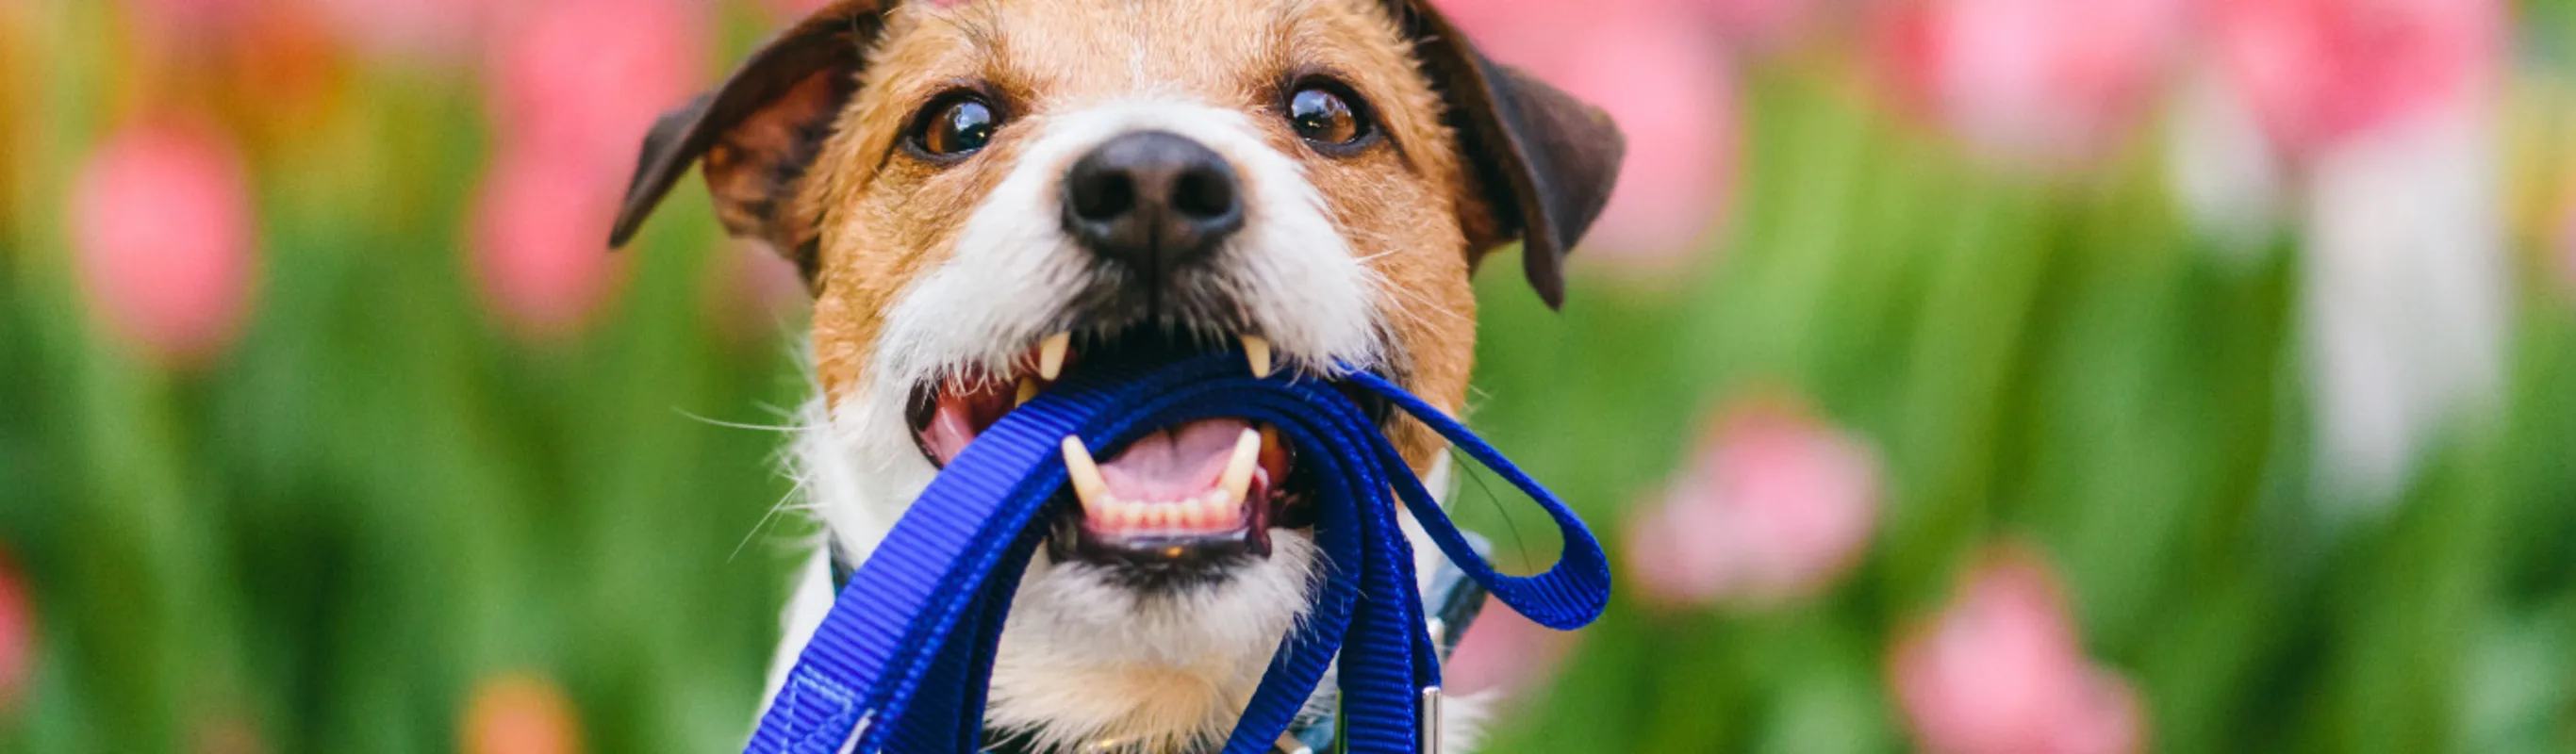 Small white & brown dog holding a blue leash in his mouth